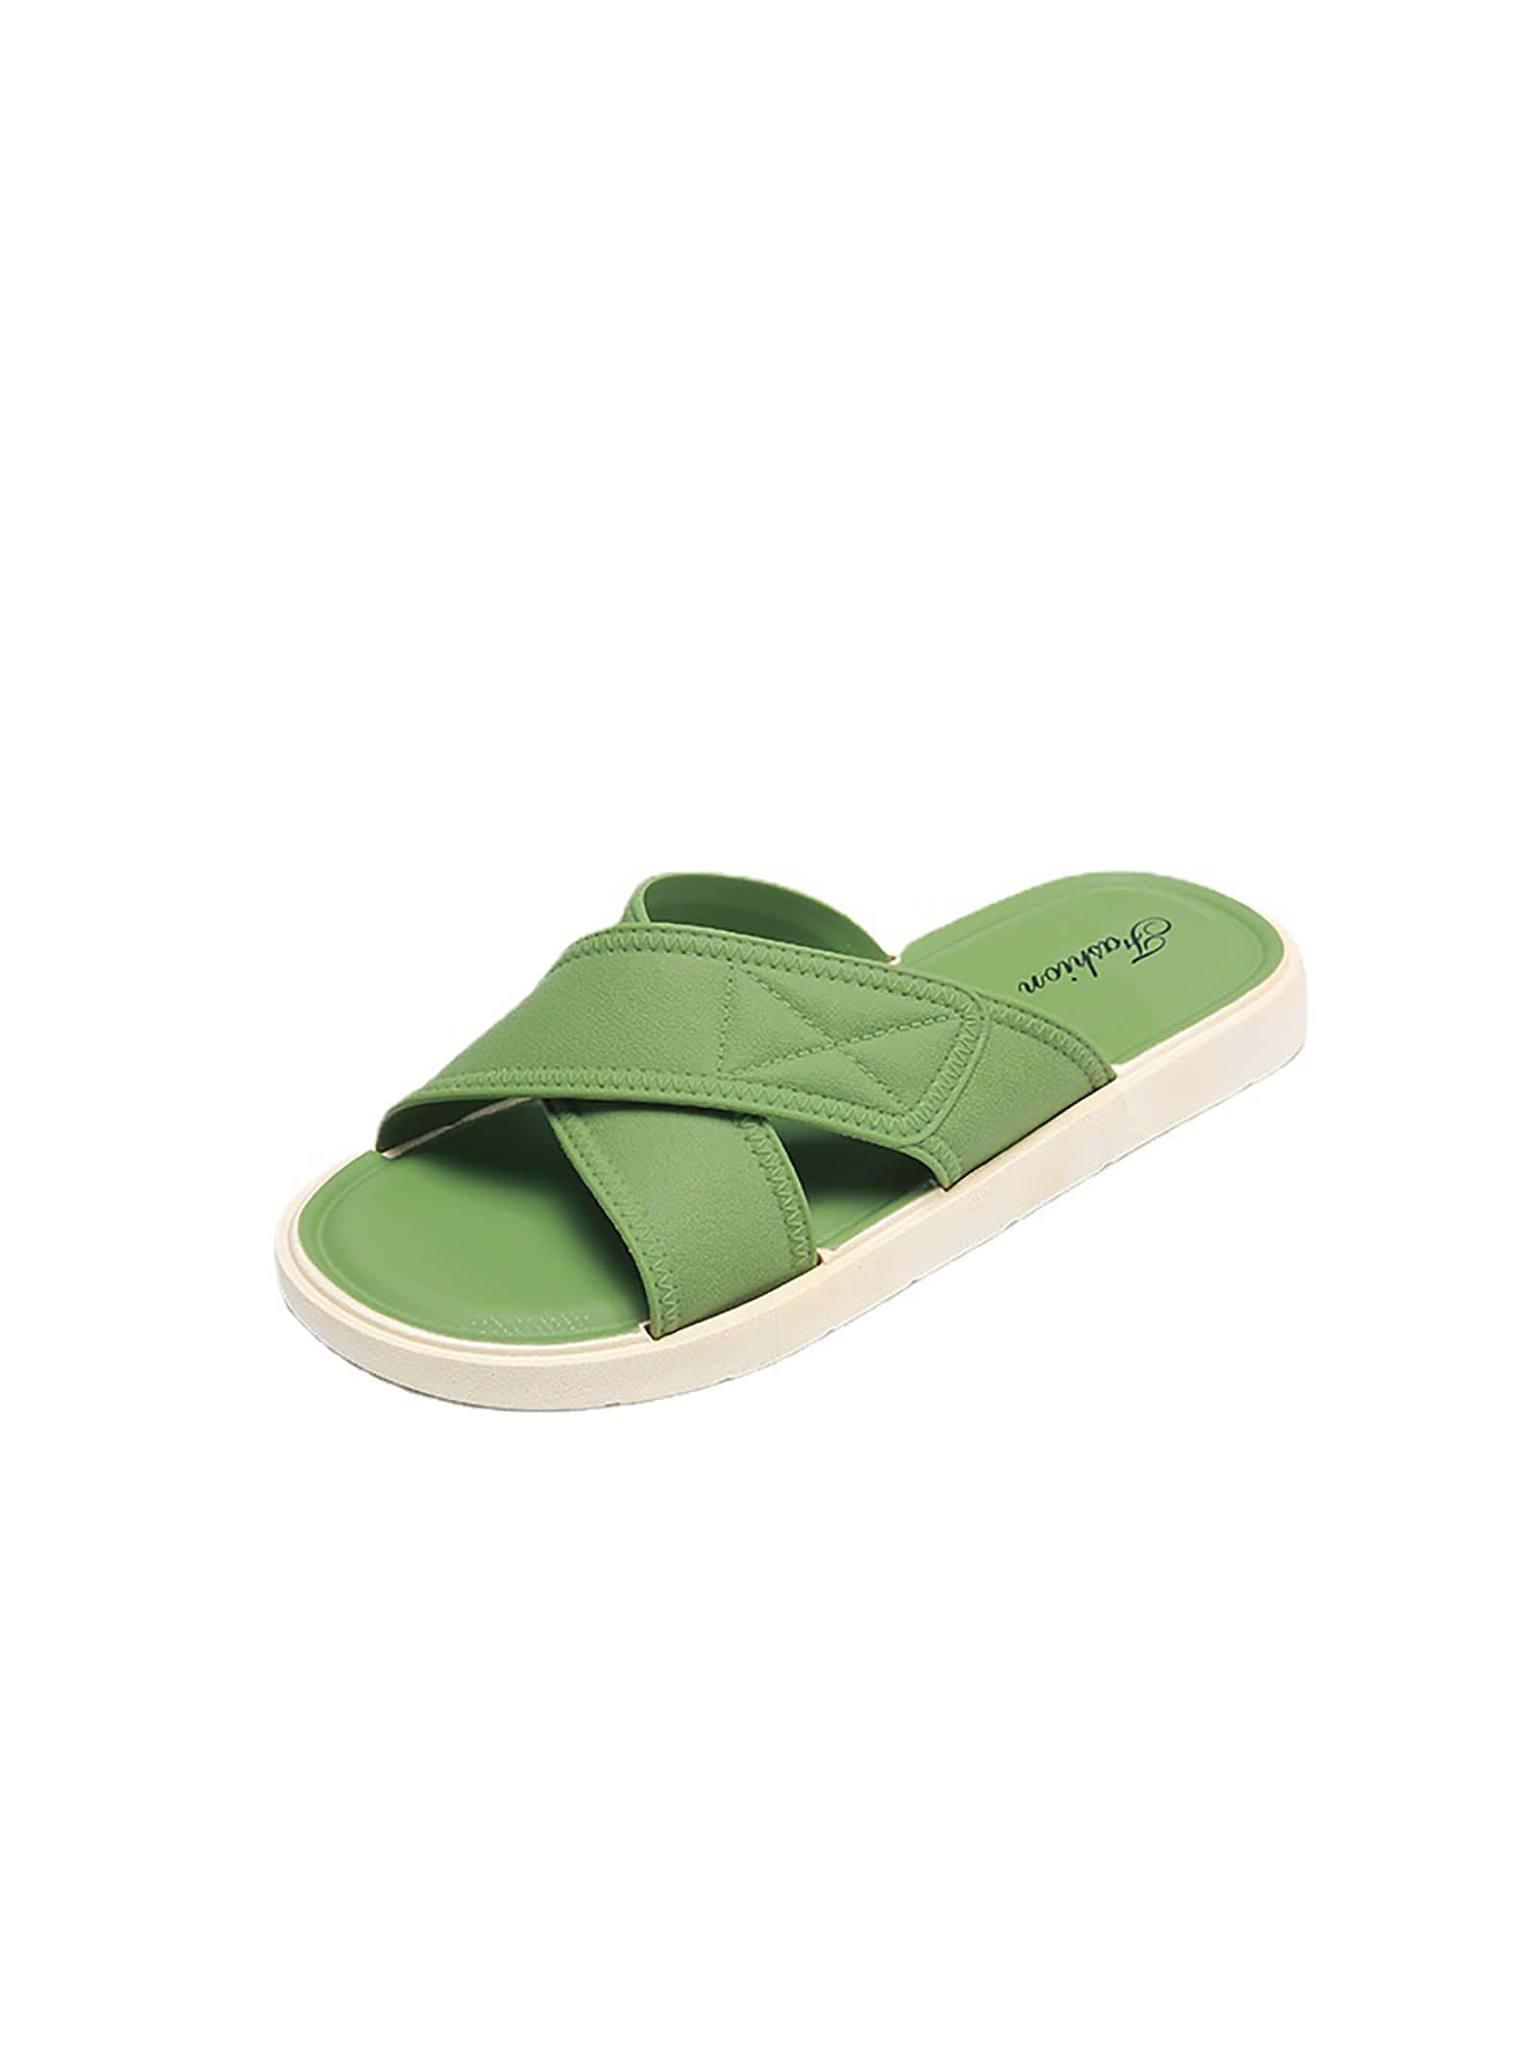 New Arrival Simple, Elegant And Versatile Slippers With Soft Pvc Outsole For Anti-Slip On The Beach And In Home Bathroom - Suitable For Indoor And Outdoor Wear, Giving You A Chic And Fresh Ins Look-Green-6